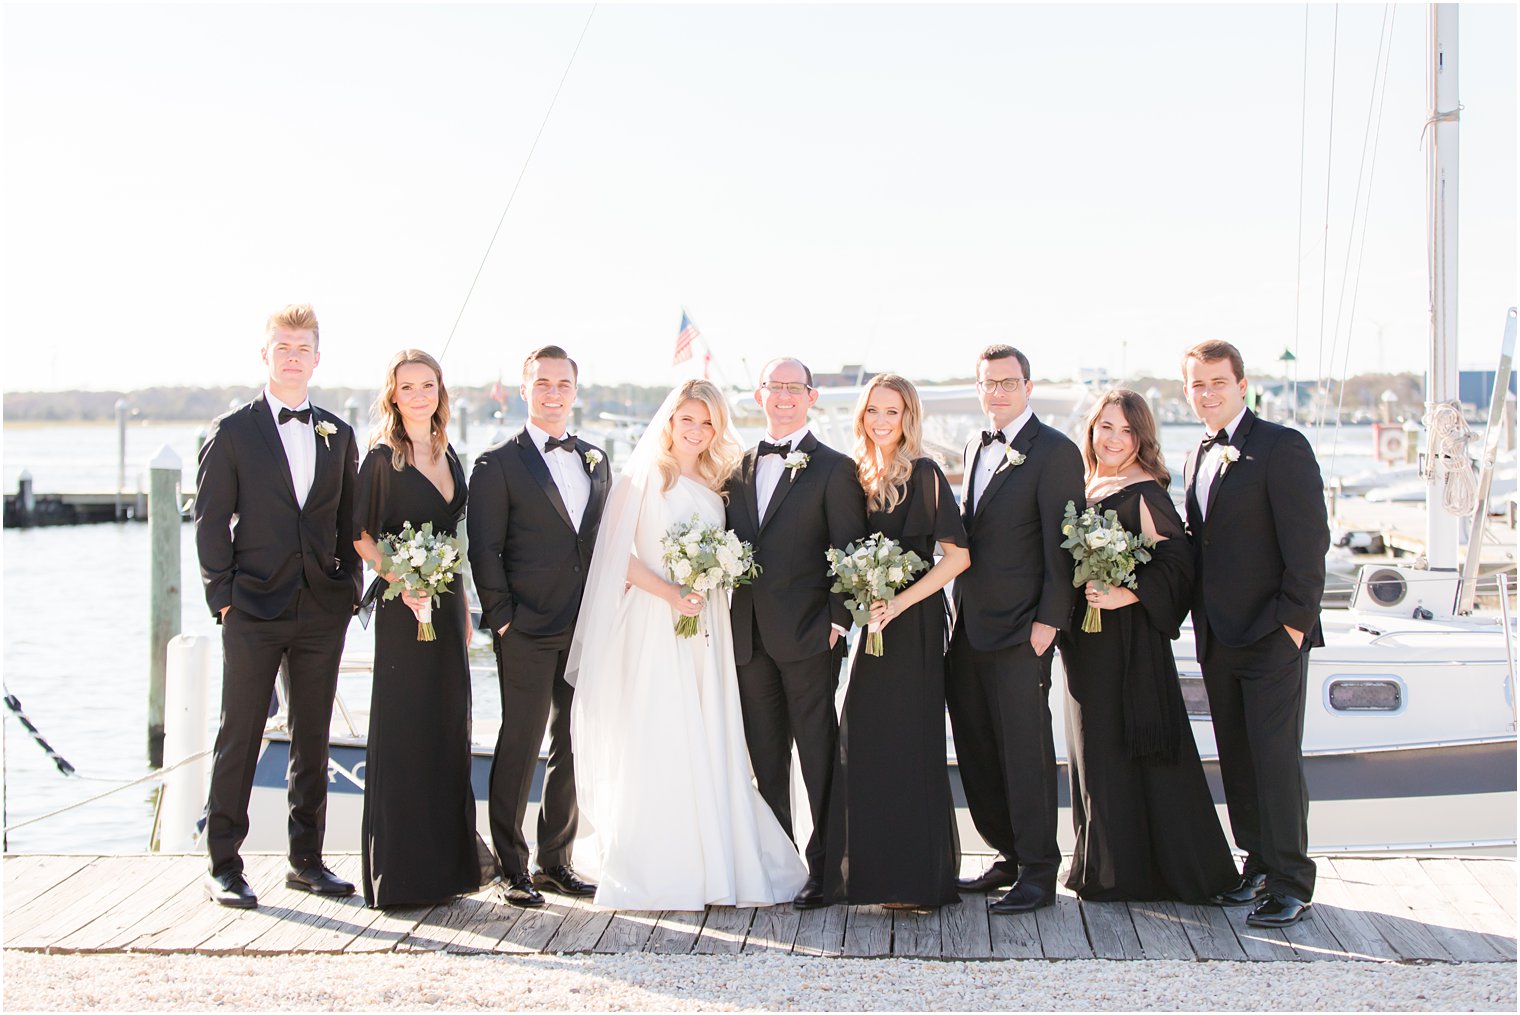 bride and groom pose with bridal party in black dresses and tuxes